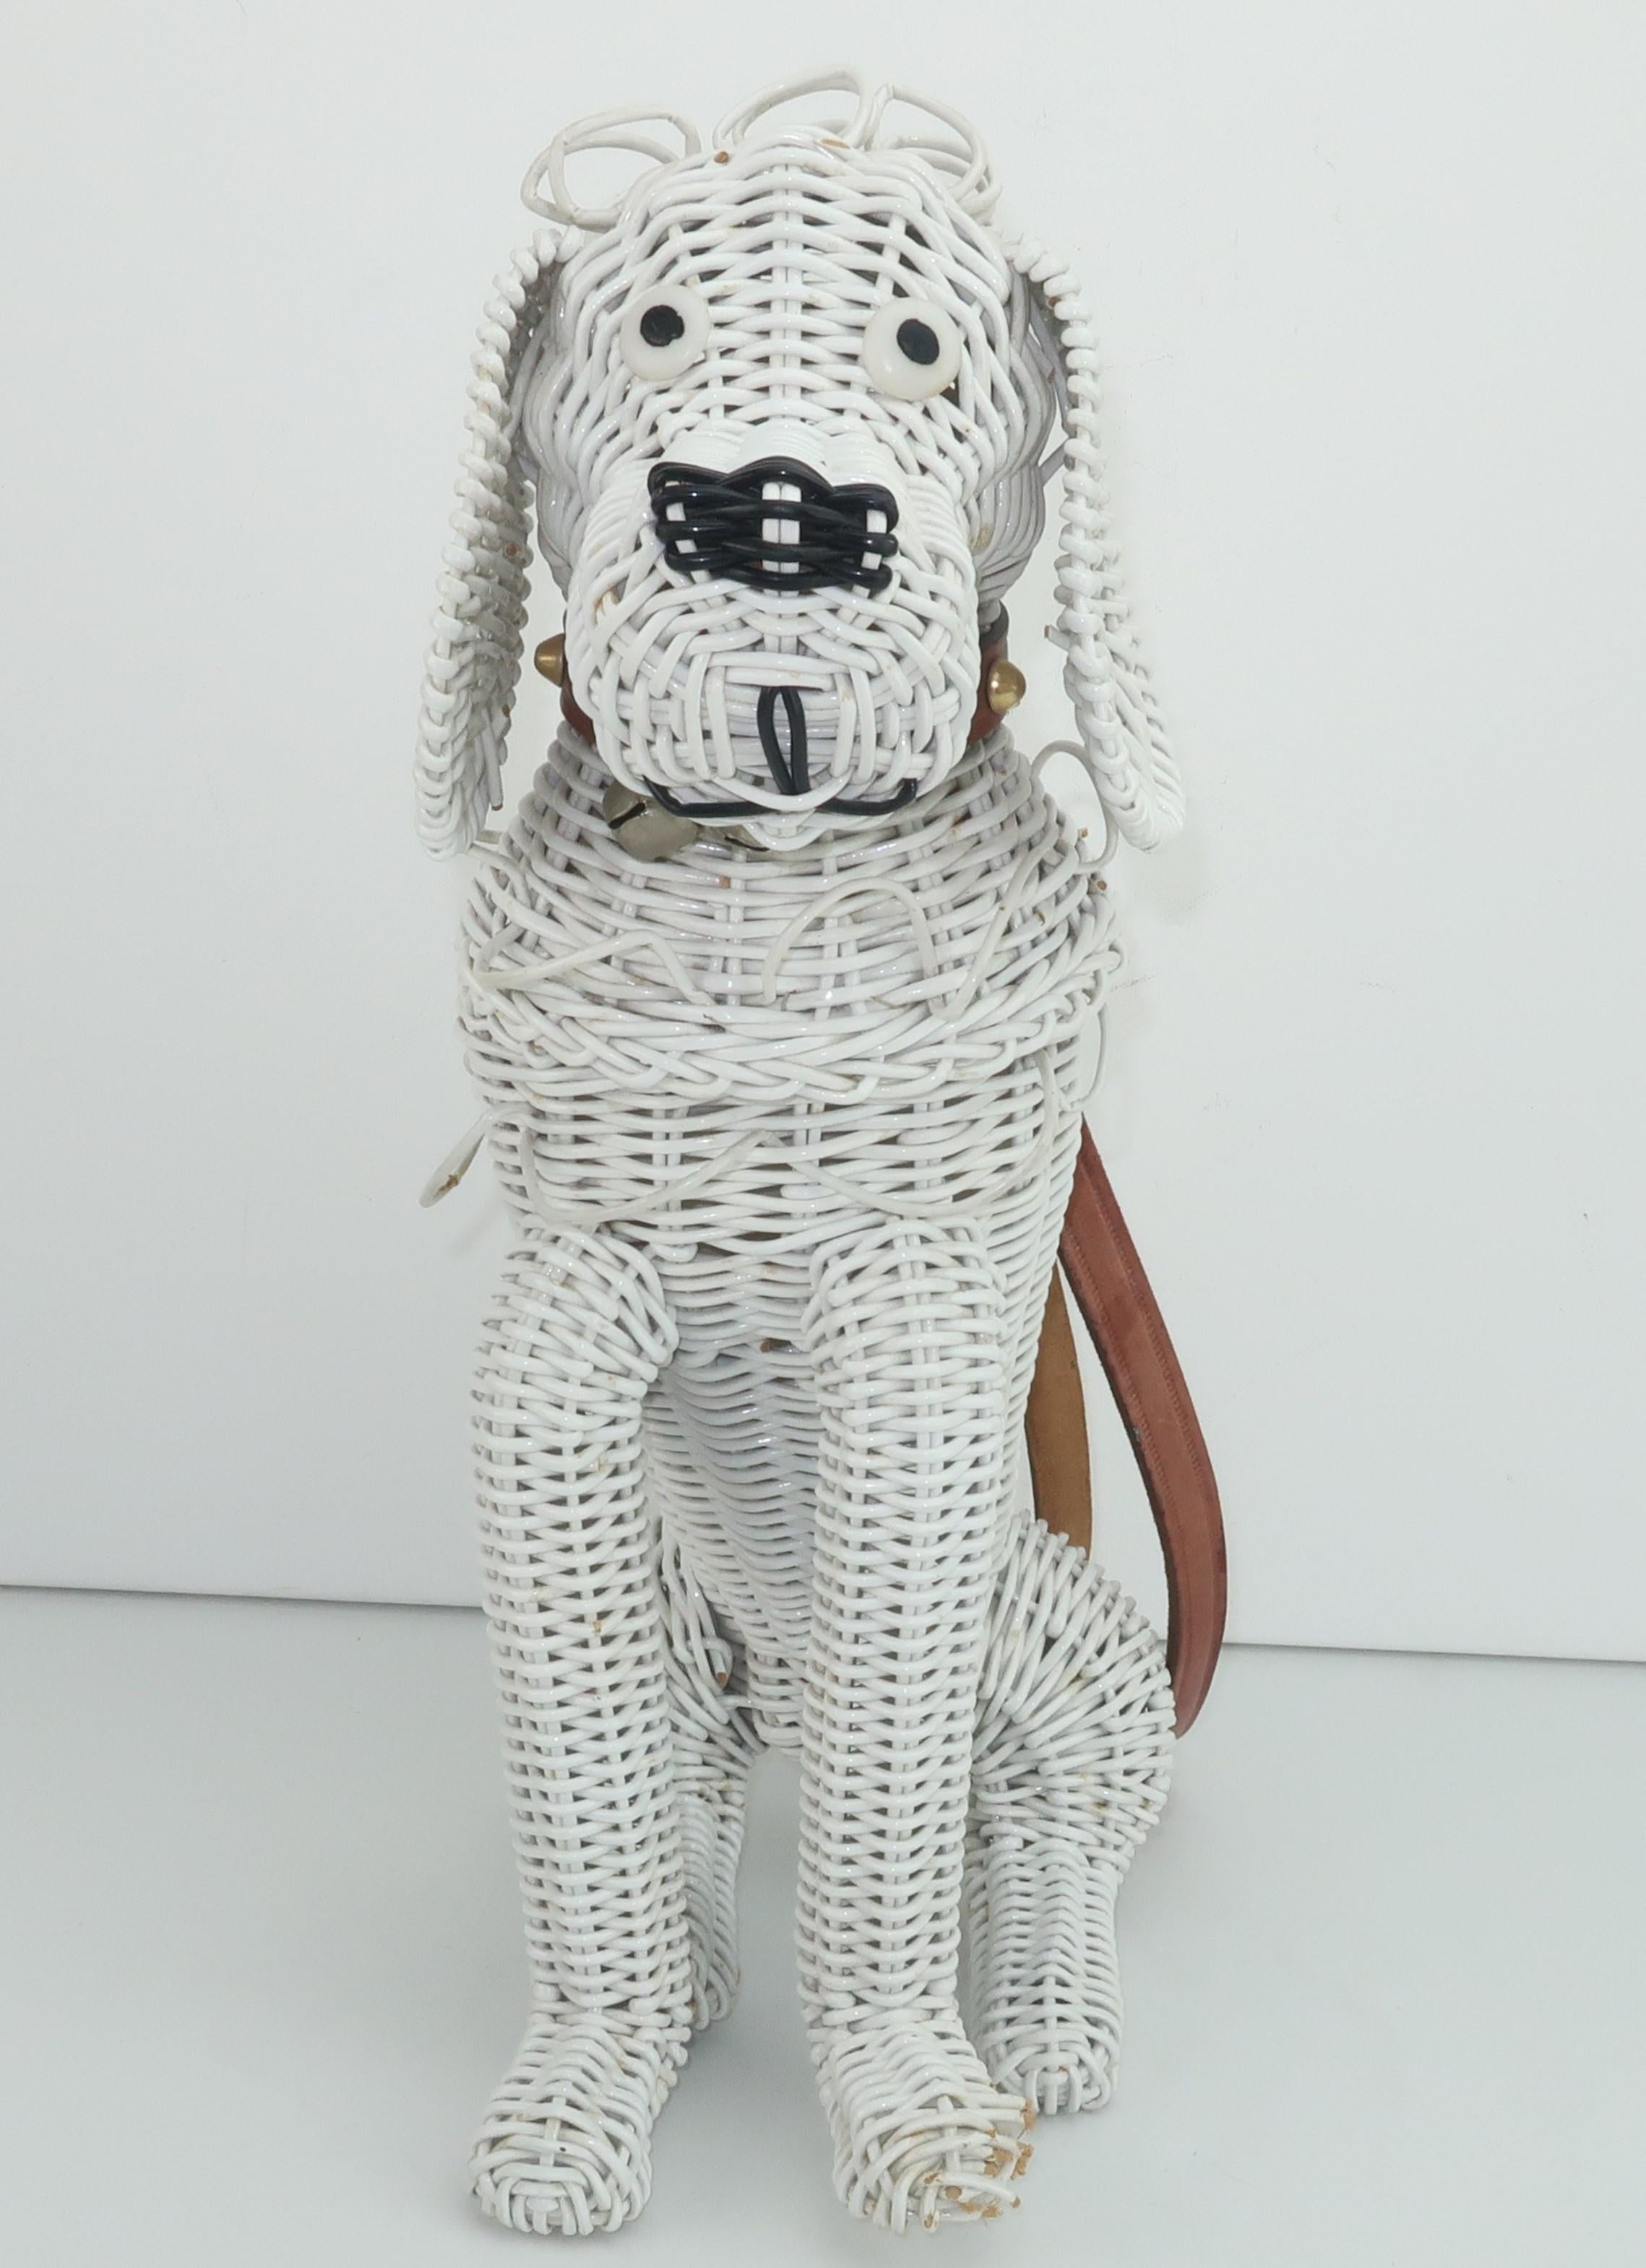 Adorable 1950's laminated white wicker handbag by Stylecraft of Miami in the shape of a poodle with leather collar and leash functioning as a handle.  The wicker is cleverly looped to create the look of poodle curls and the collar is decorated with